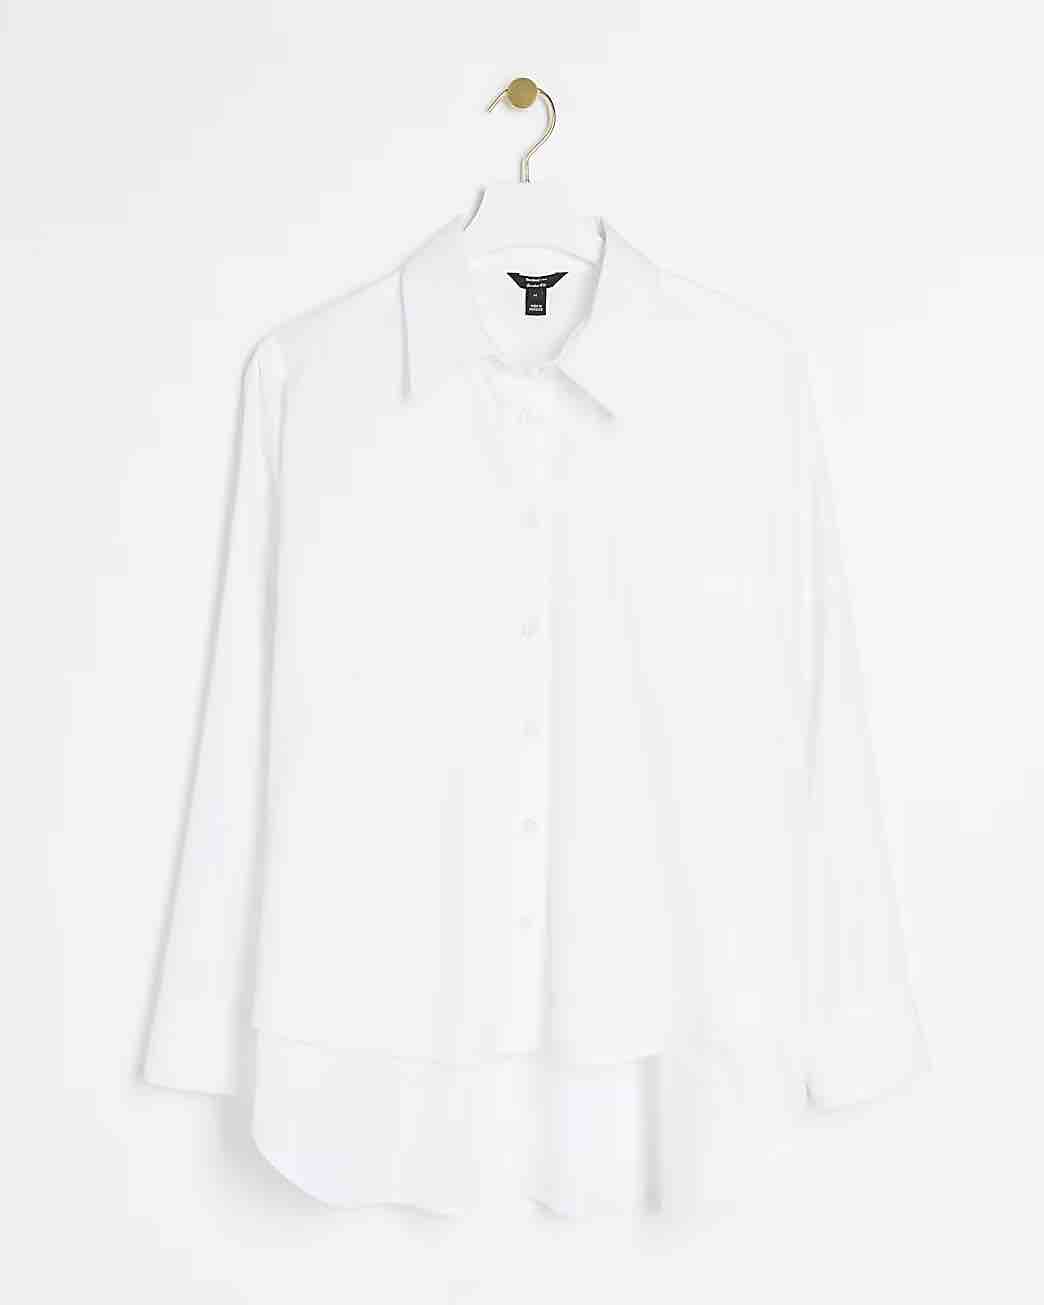 Five Things We Are Loving At River Island Poplin Longline Button-Up Shirt staple winter wardrobe pieces affordable must have pieces for winter what to buy for your winter closet affordable button-up shirt for work affordable top for work affordable blouse for the office